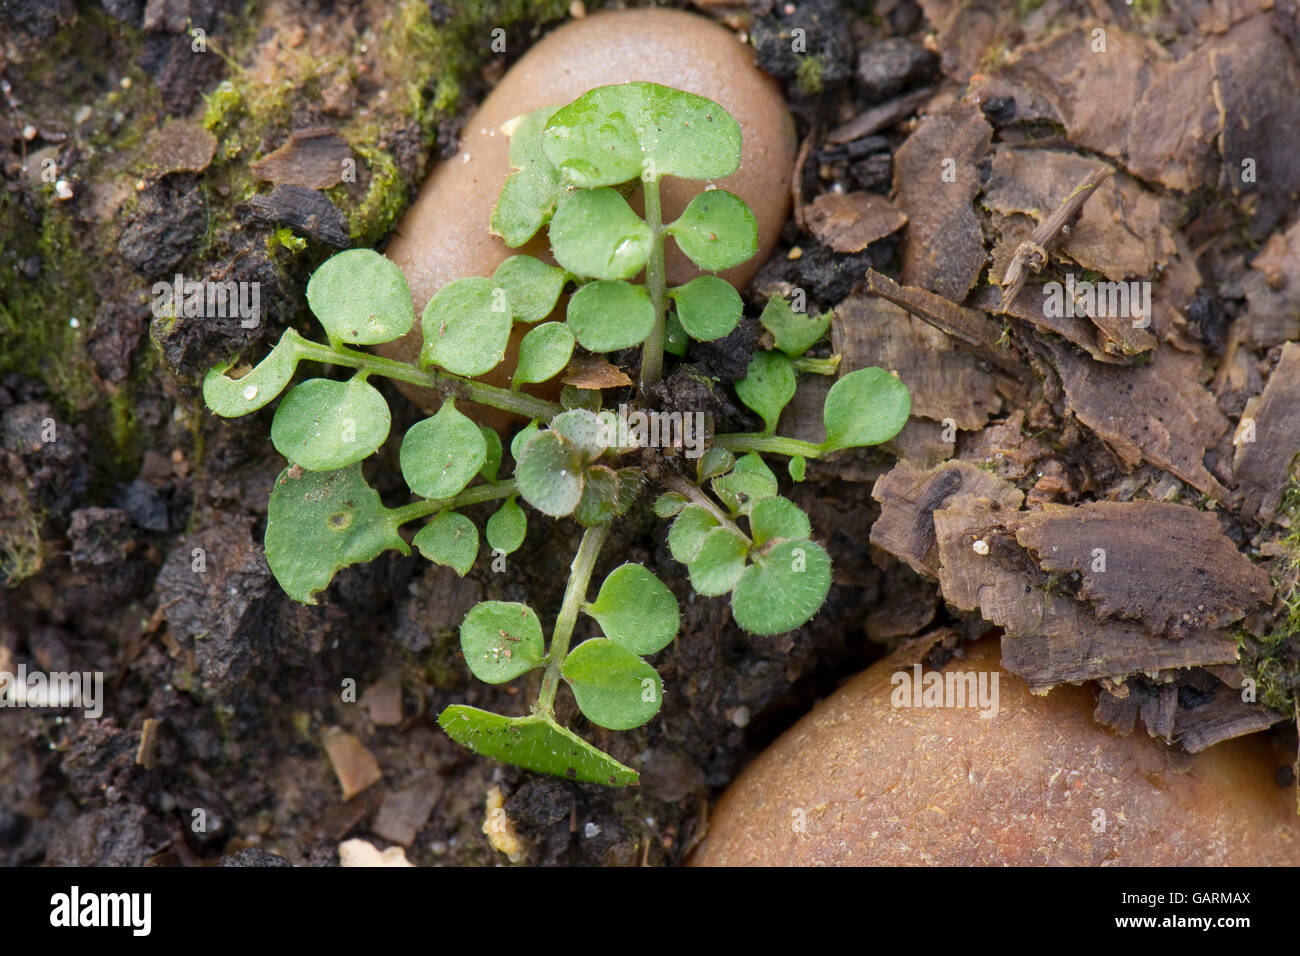 A hairy bittercress, Cardamine  hirsuta, young plant leaf rosette, a common garden weed, February Stock Photo